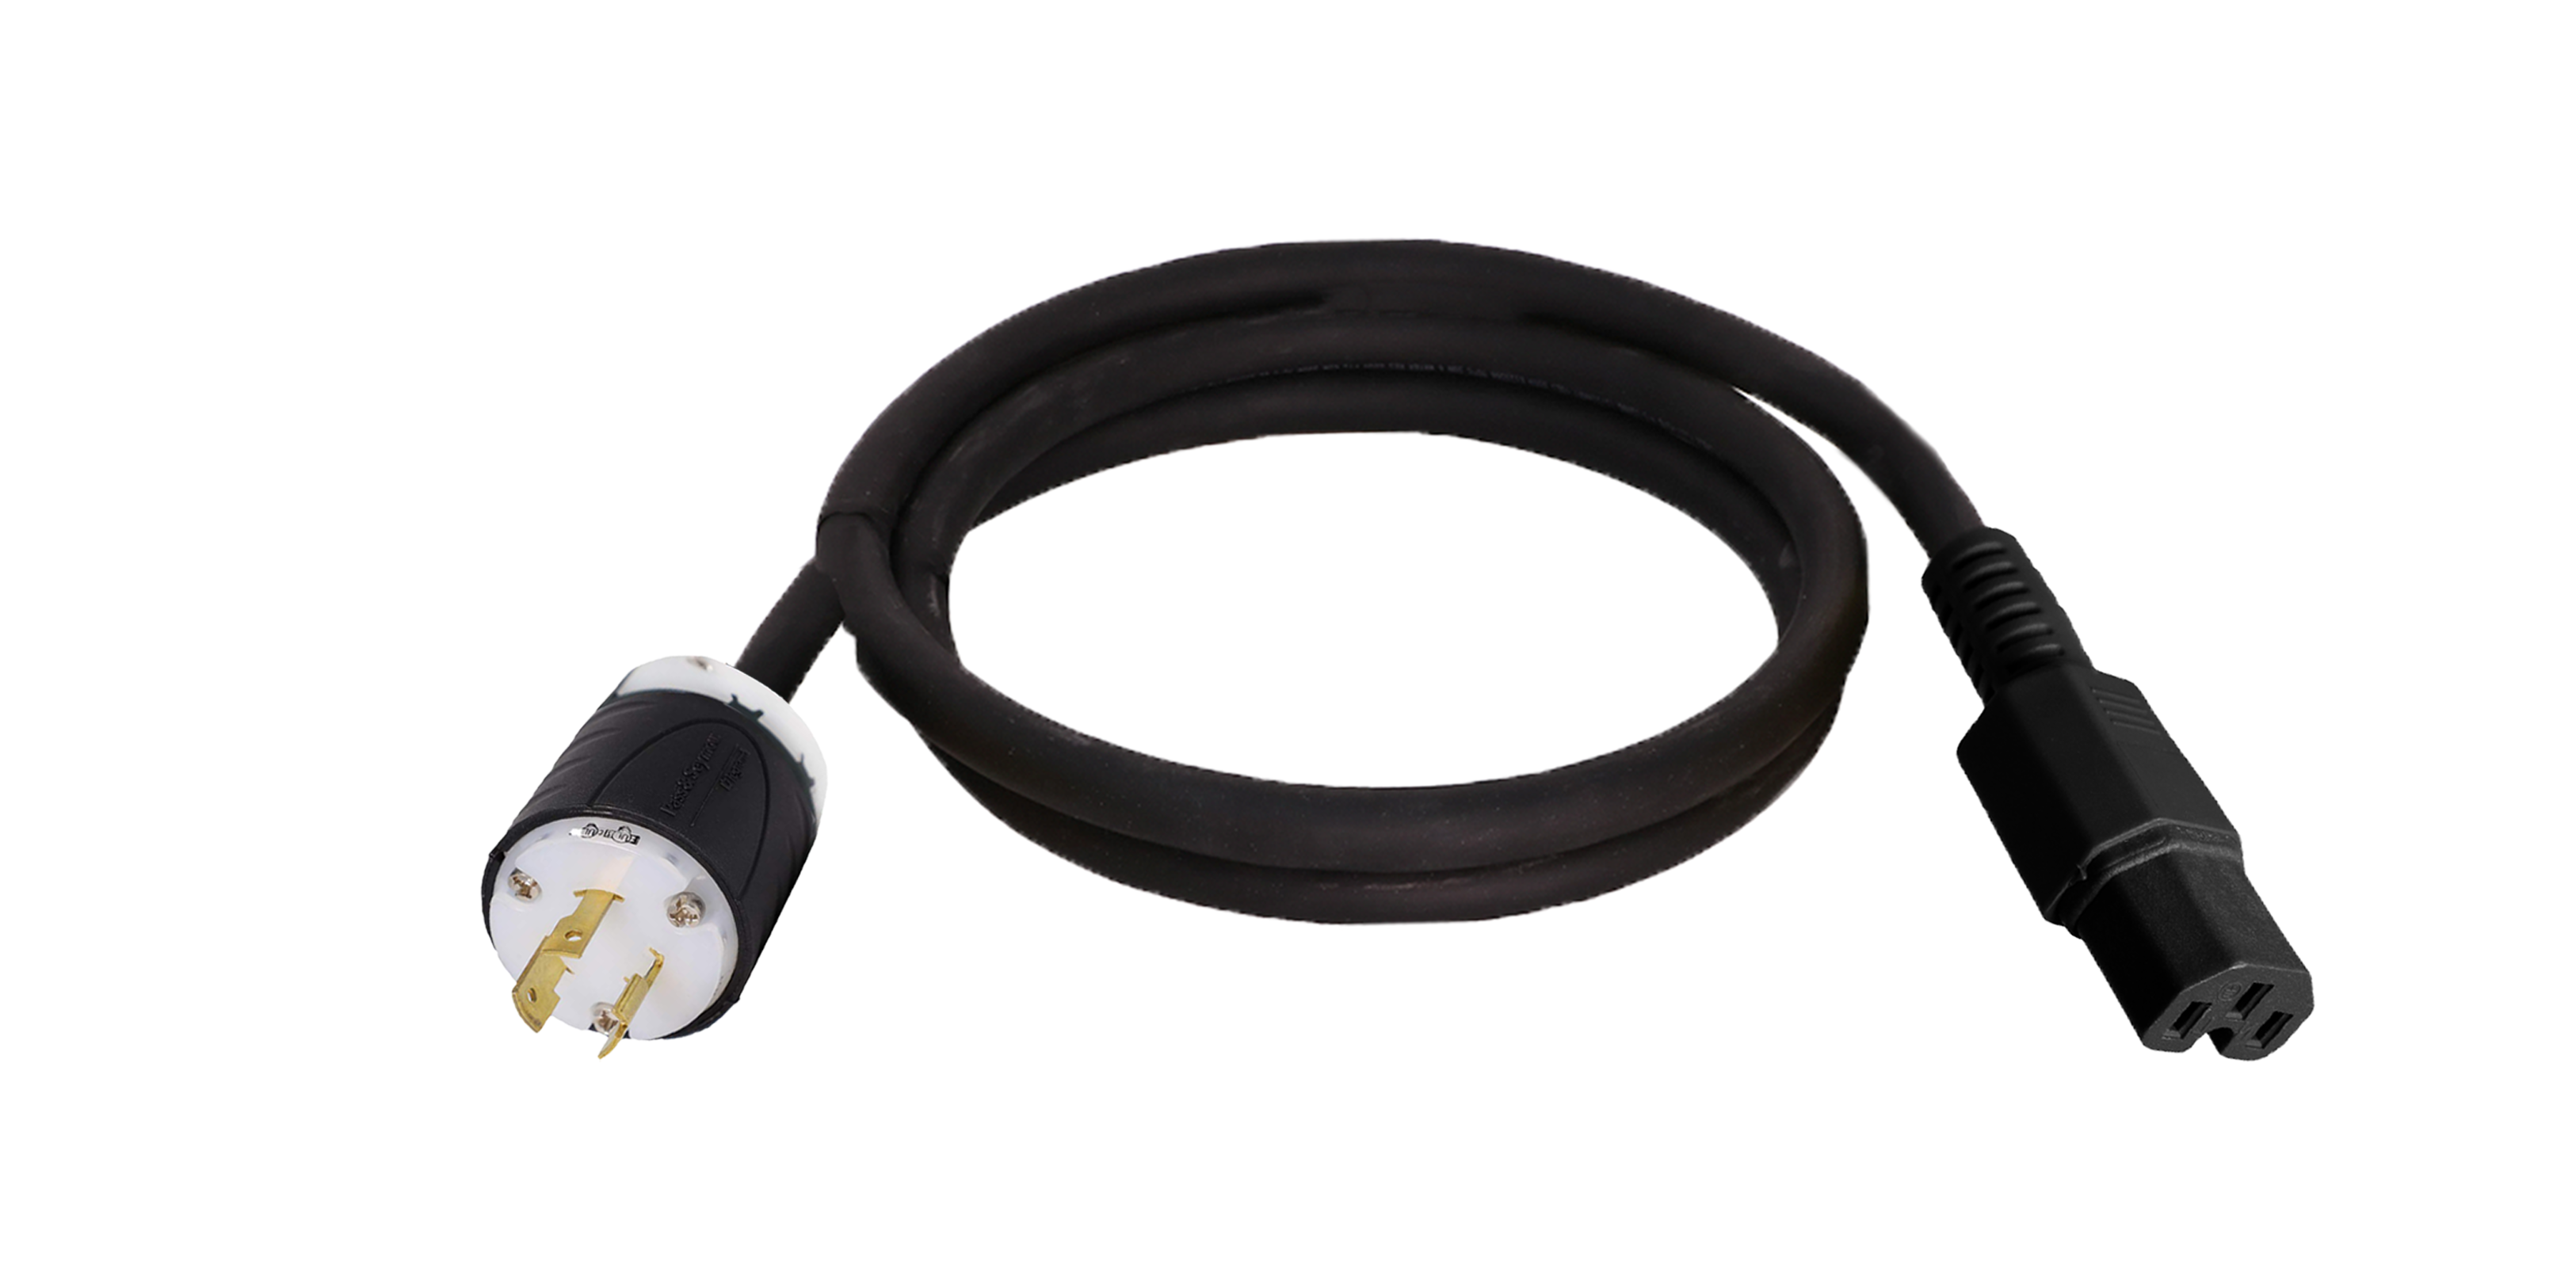 l5-20 to c15 power cable